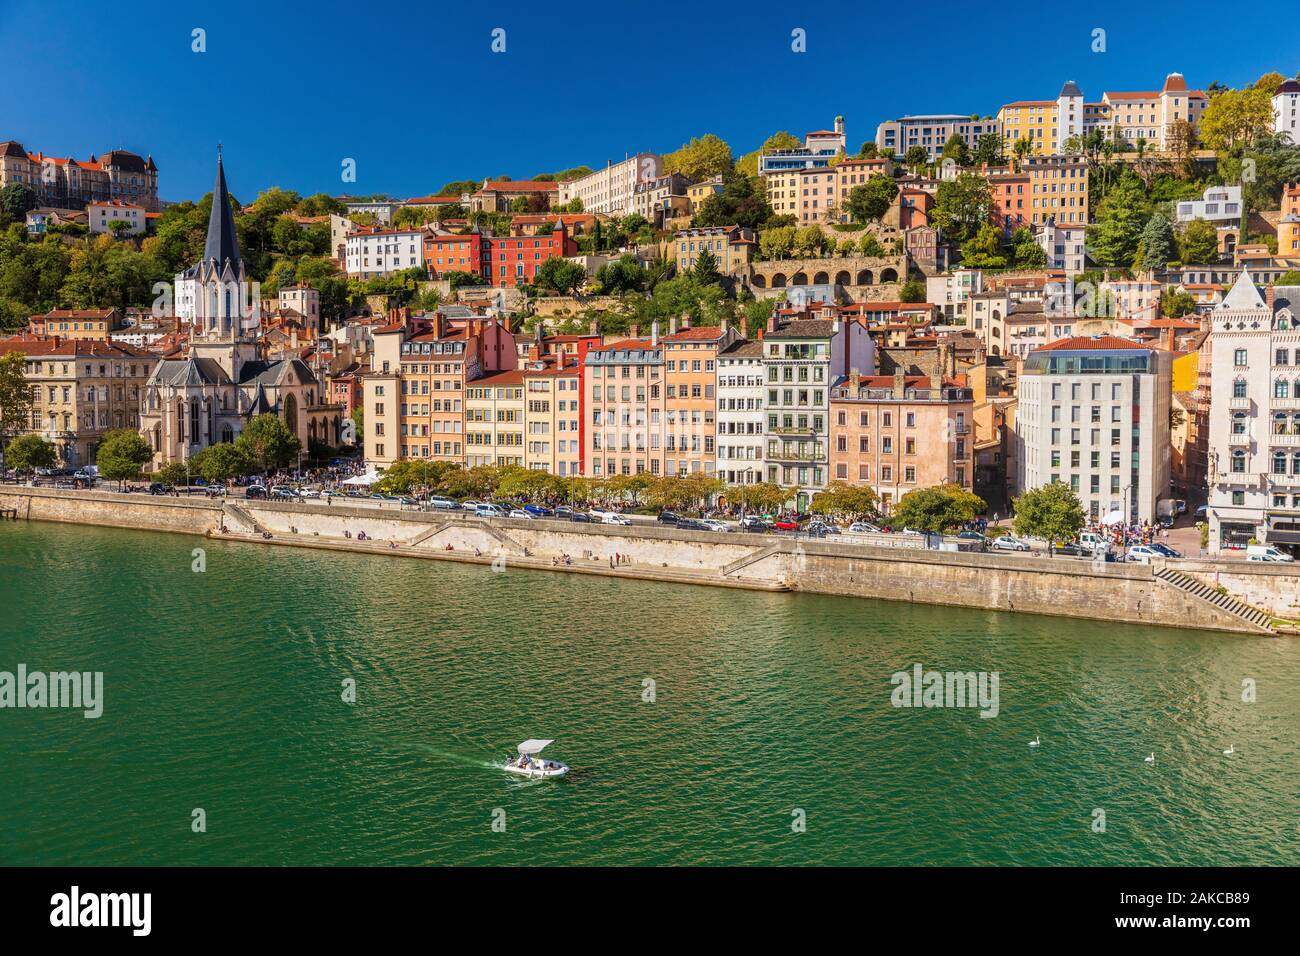 France, Rhone, Lyon, historic district listed as a UNESCO World Heritage site, Old Lyon, Quai Fulchiron on the banks of the Saone river, Saint Georges church, the Blanchon house and the Saint-Just high school on the Fourviere hill Stock Photo